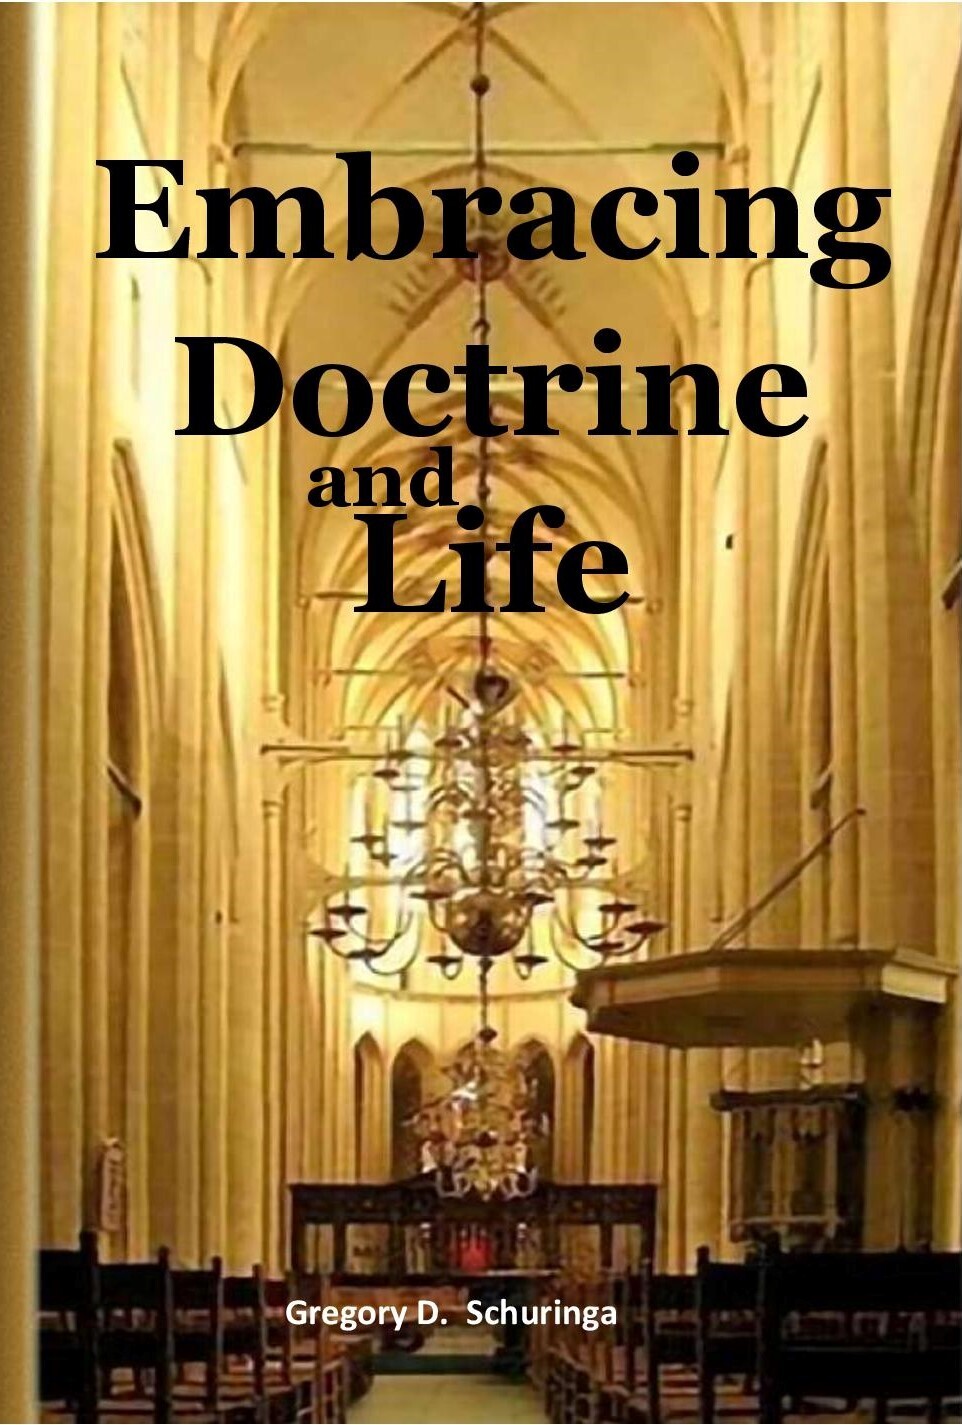 Embracing Doctrine and Life: Simon Oomius in the Context of Further Reformation Orthodoxy (Soft-Cover & Hard-Cover) by Gregory D. Schuringa. Foreword by Robert Muller